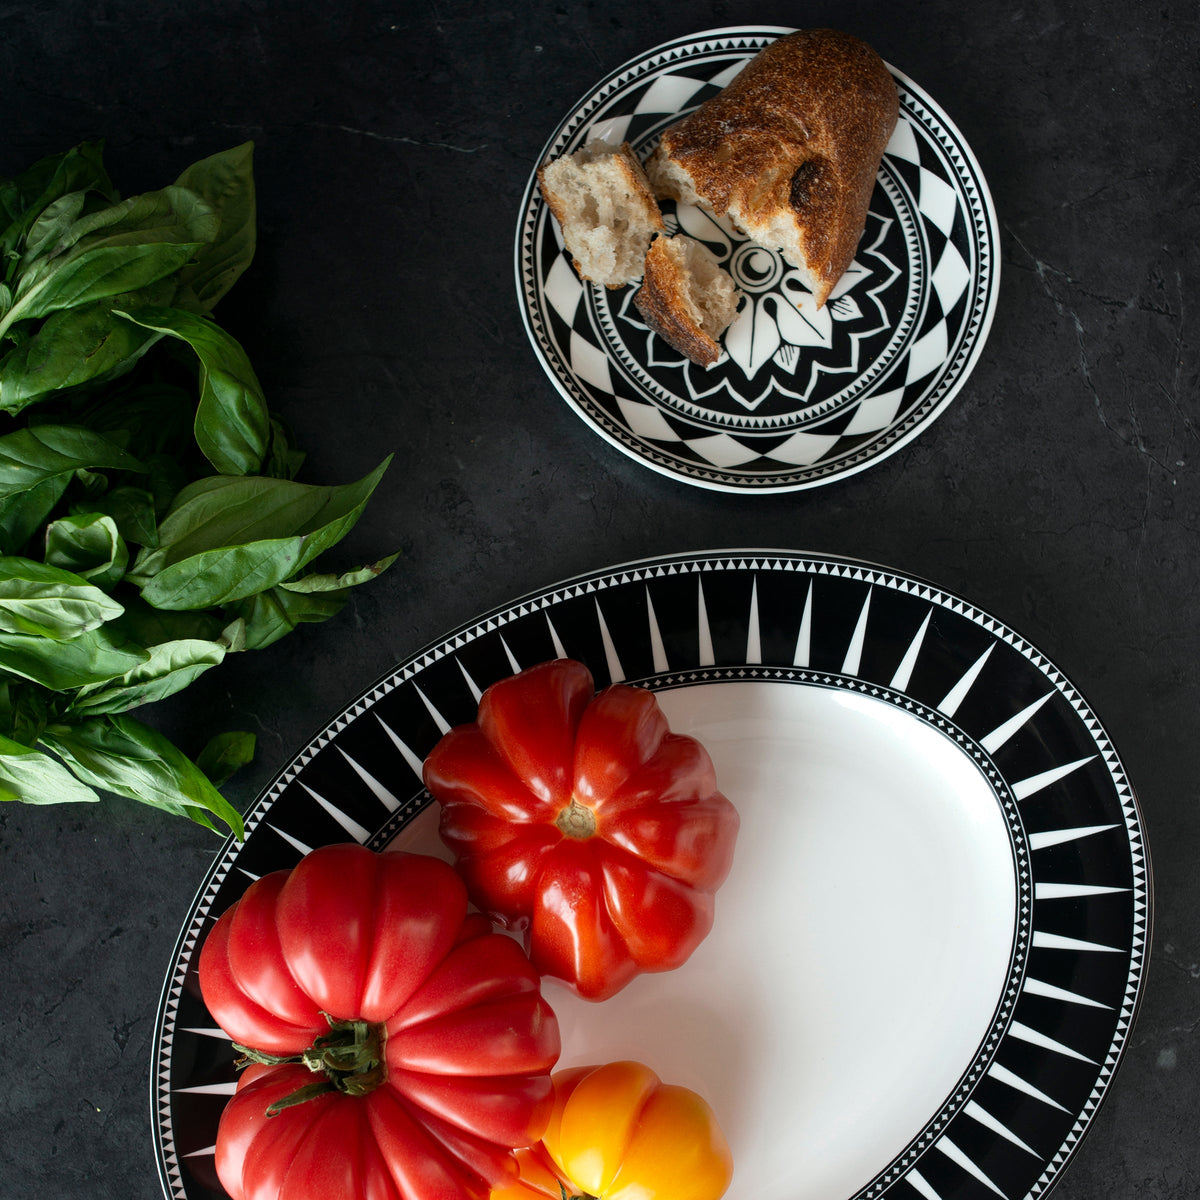 Patterned **Fez Small Plates by Caskata Artisanal Home** featuring bold geometrics on a dark surface, one holding large tomatoes and another with a piece of bread; fresh basil is placed to the side.